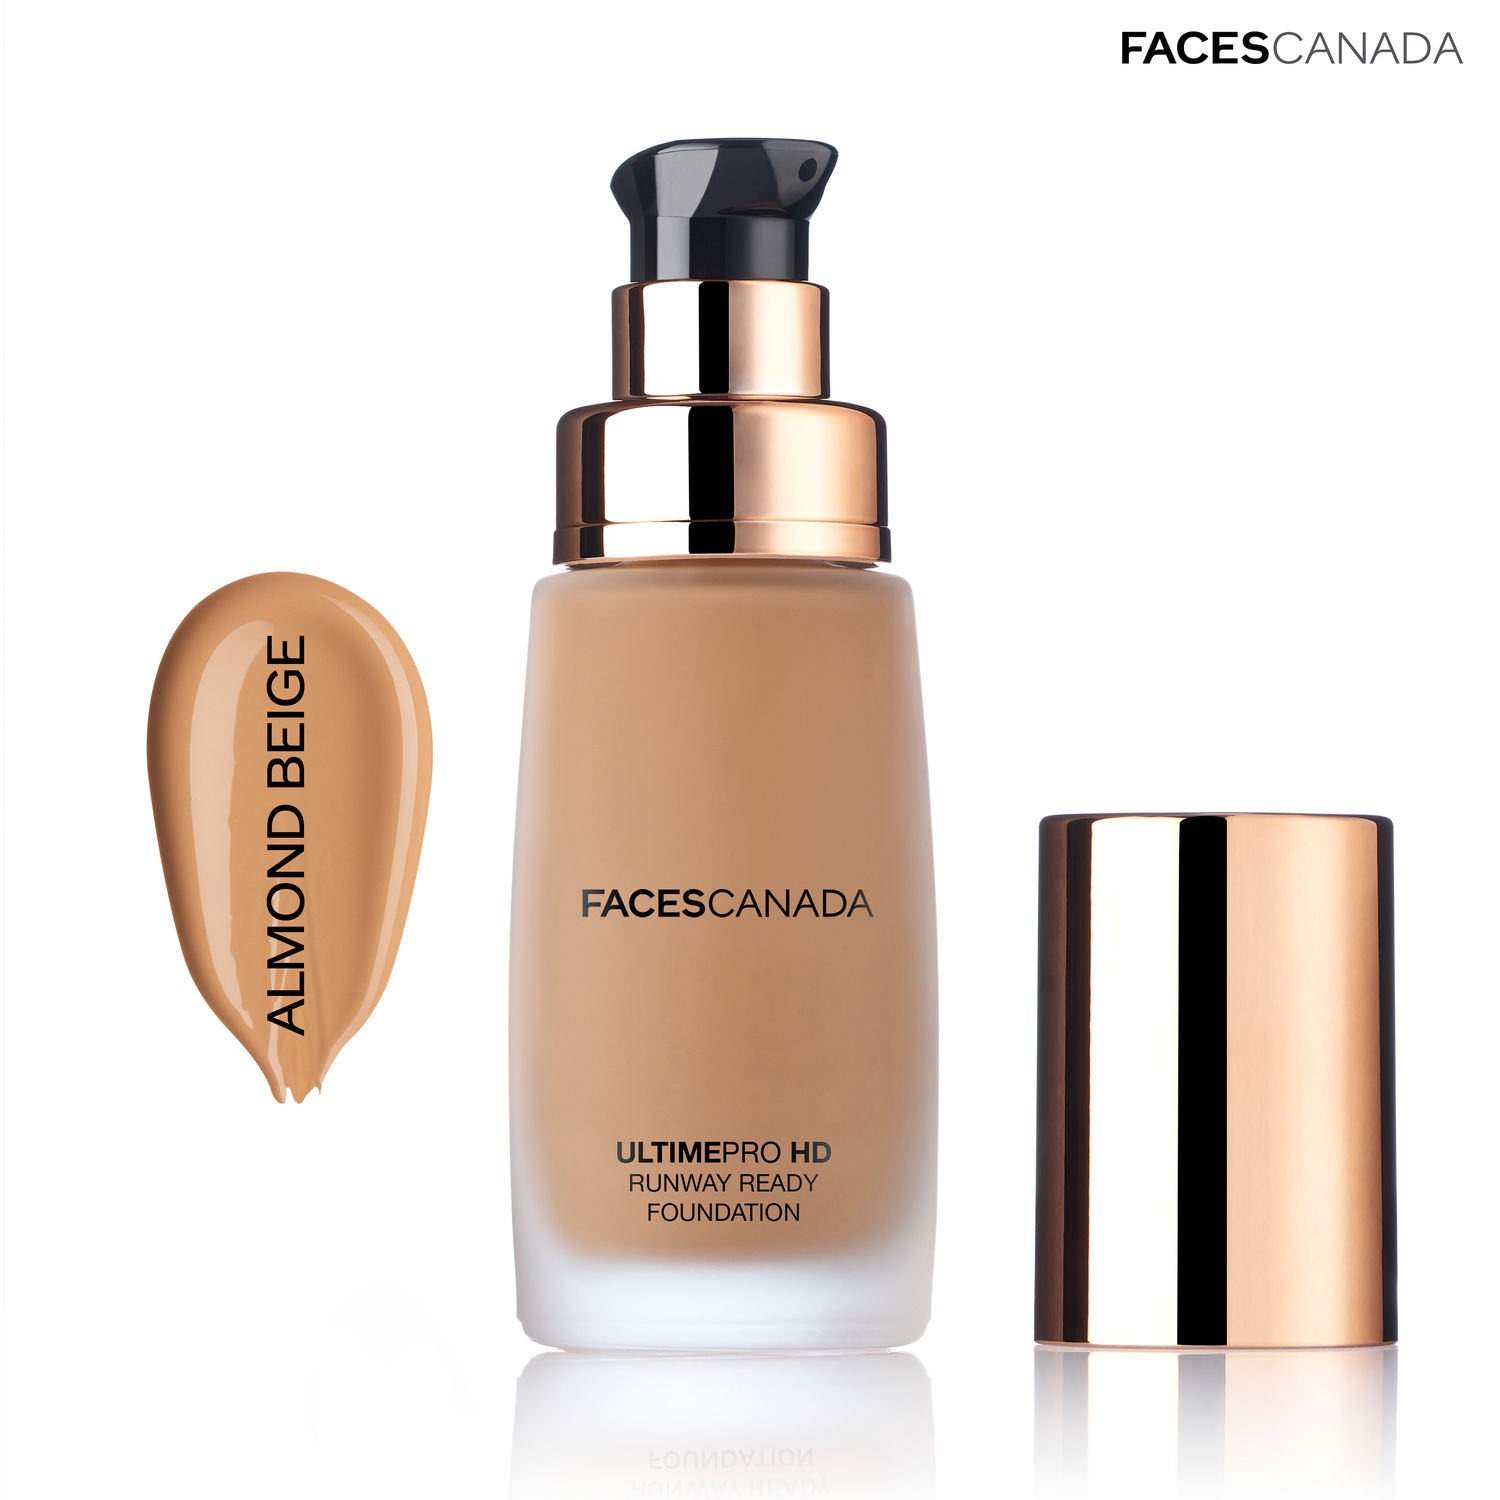 Buy FACES CANADA Ultime Pro HD Runway Ready Foundation - Almond Beige, 30ml | Radiant Flawless Finish | HD High Coverage | Blends Easily | Longwear | Natural Dewy Skin - Purplle